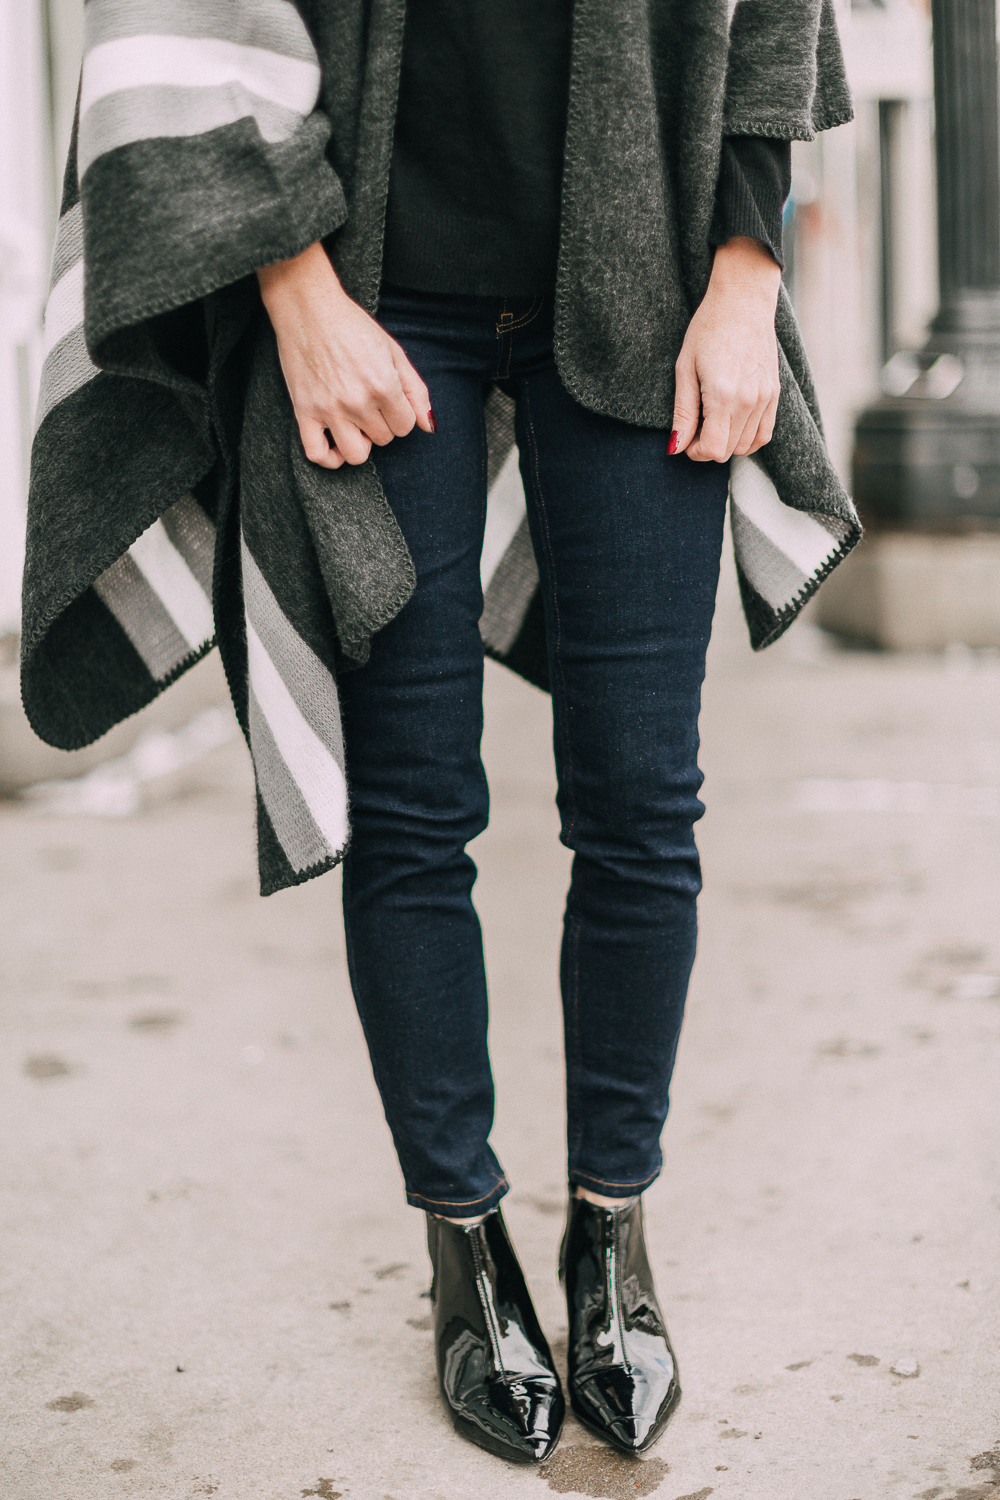 wardrobe staples your closet needs including a black cashmere crewneck sweater and high rise dark wash skinny jeans both from Walmart paired with a poncho and patent booties